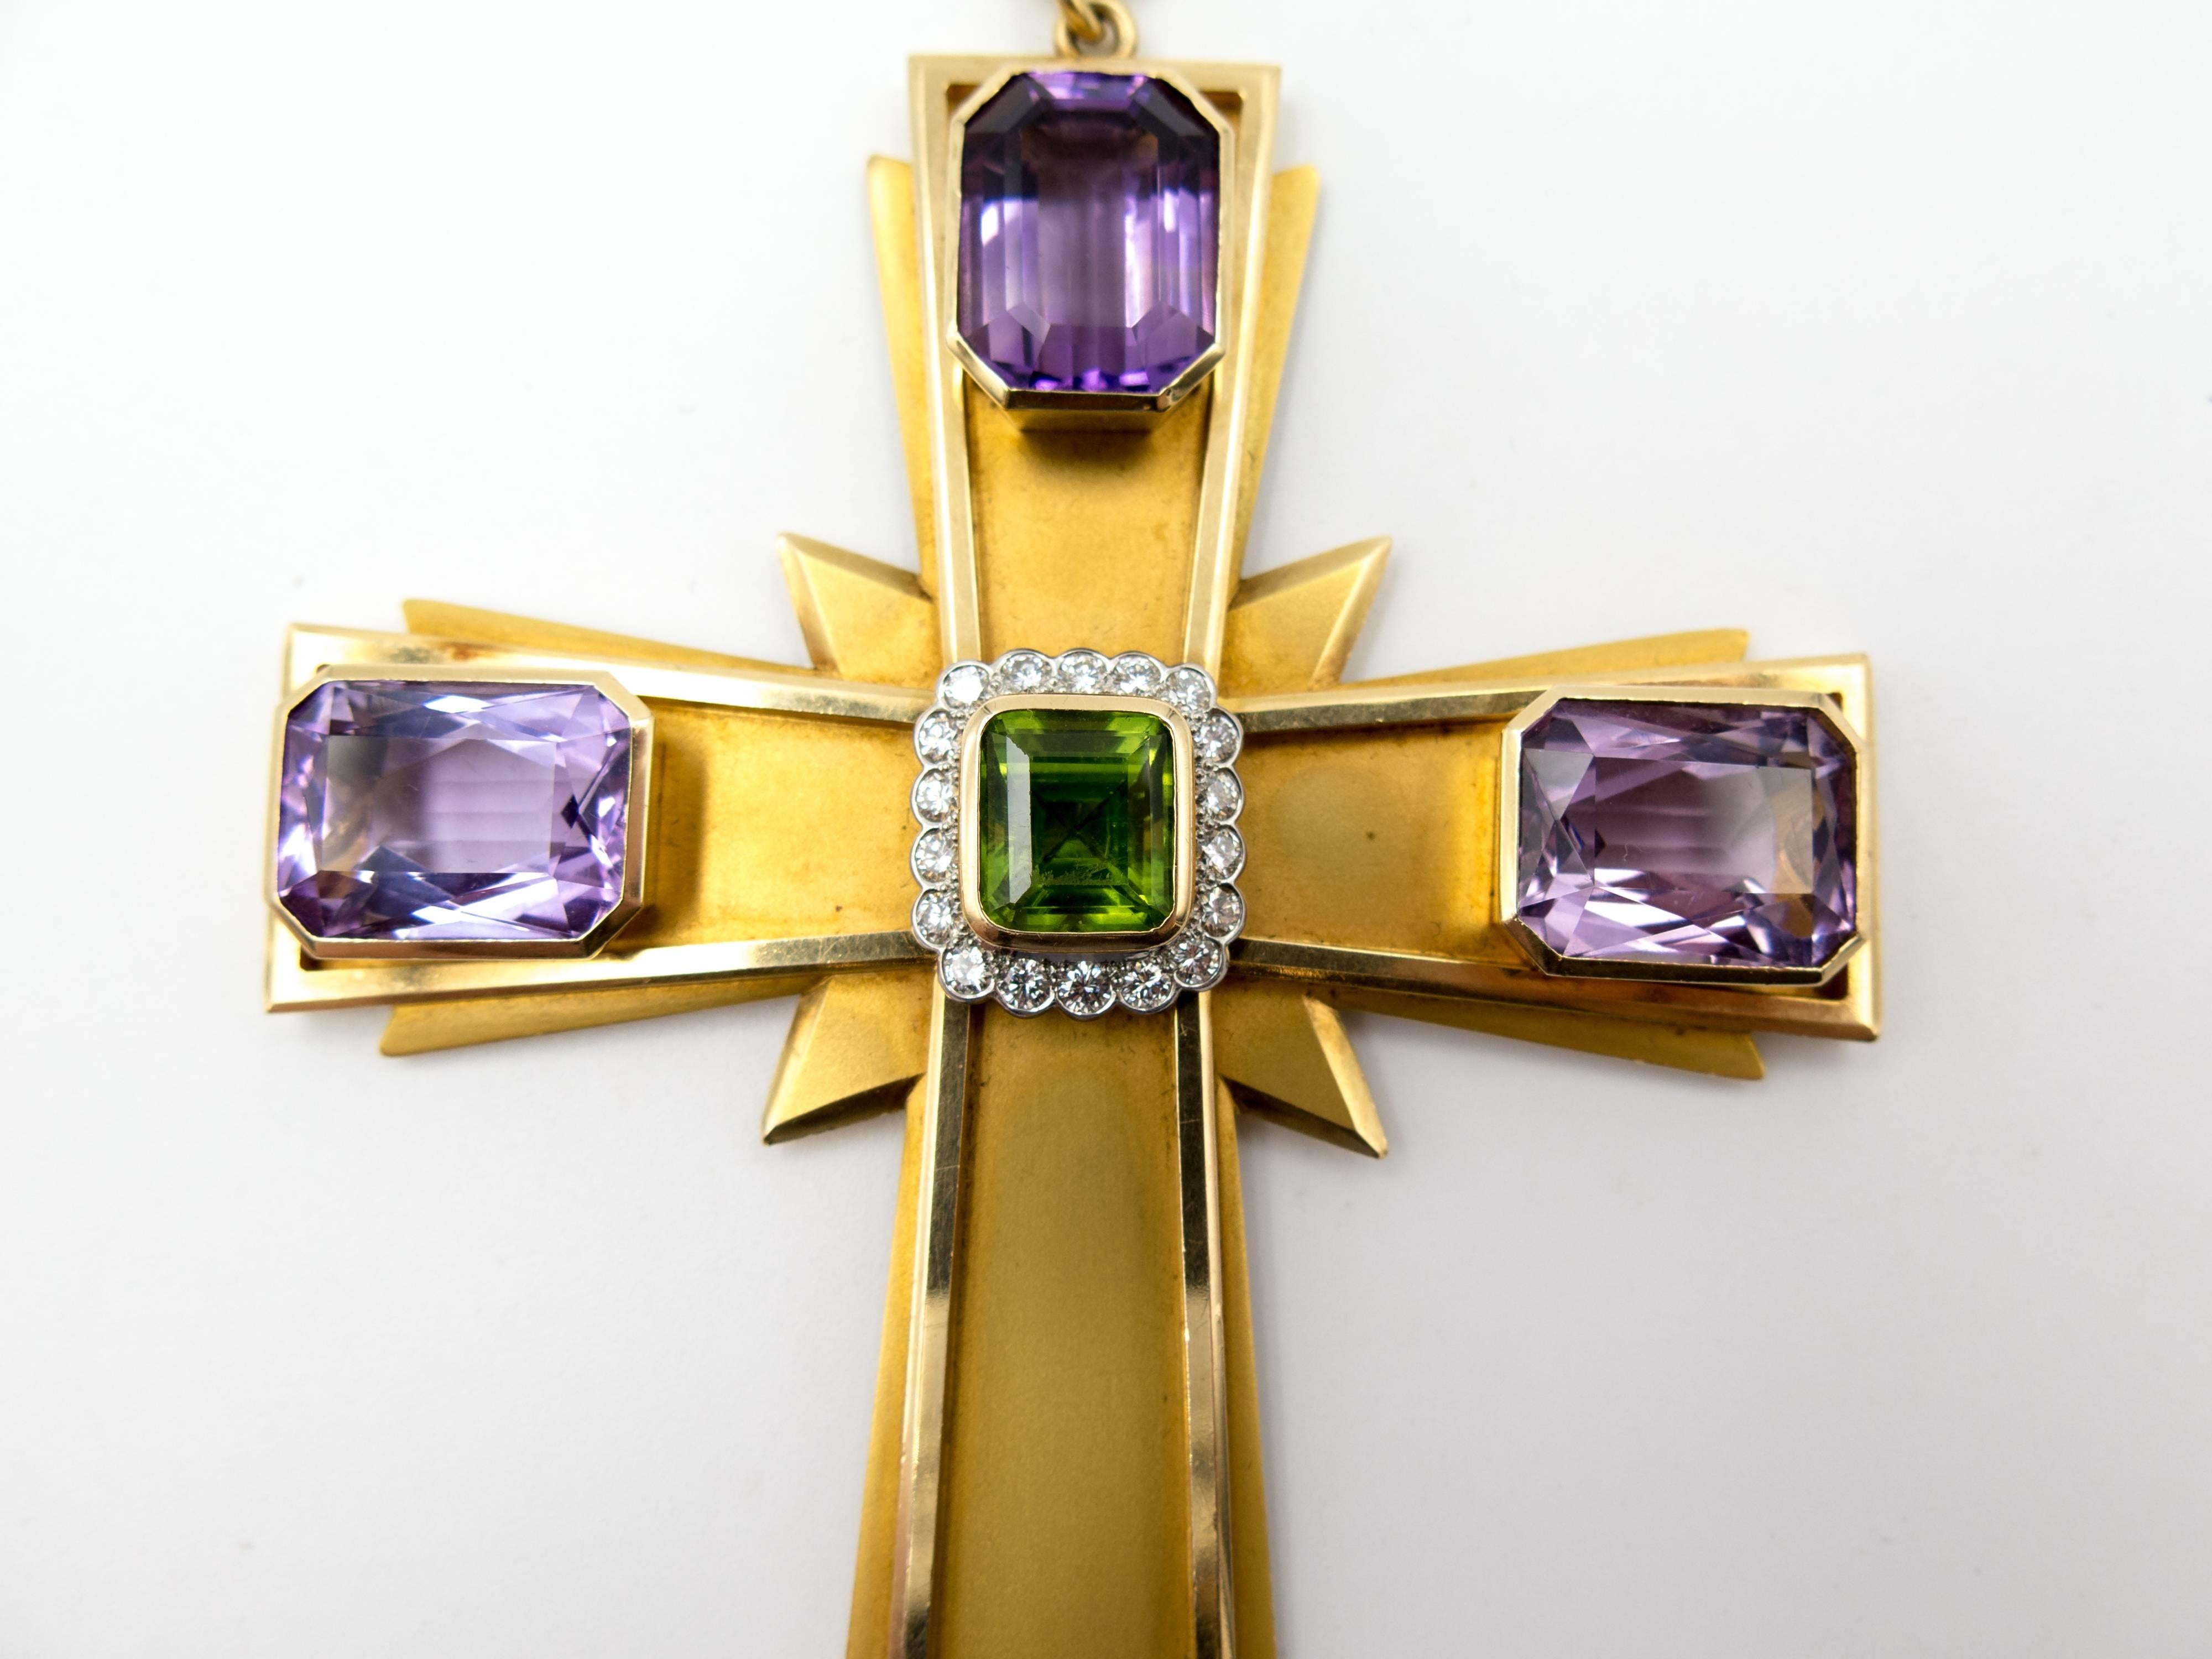 An exceptionally unusual and surprisingly wearable cross pendant from the Canadian maison Birks,( established in 1879), prominent designers, manufacturers, and retailers of unique jewelry.   This eye-catching cross measures 3" wide and 4